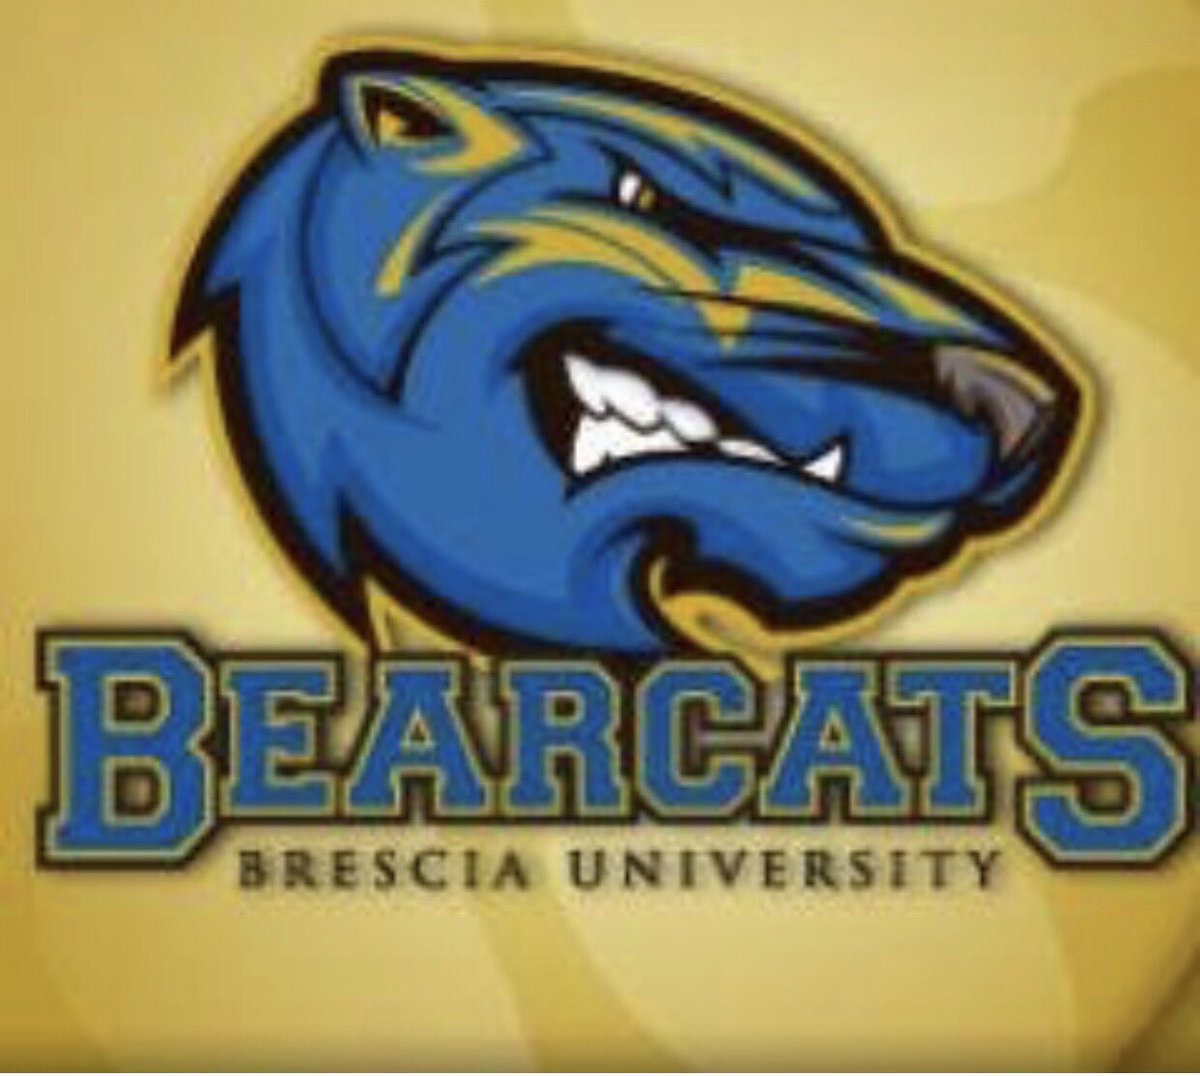 Blessed and excited to say I have verbally committed to play baseball at Brescia University @BresciaBaseball